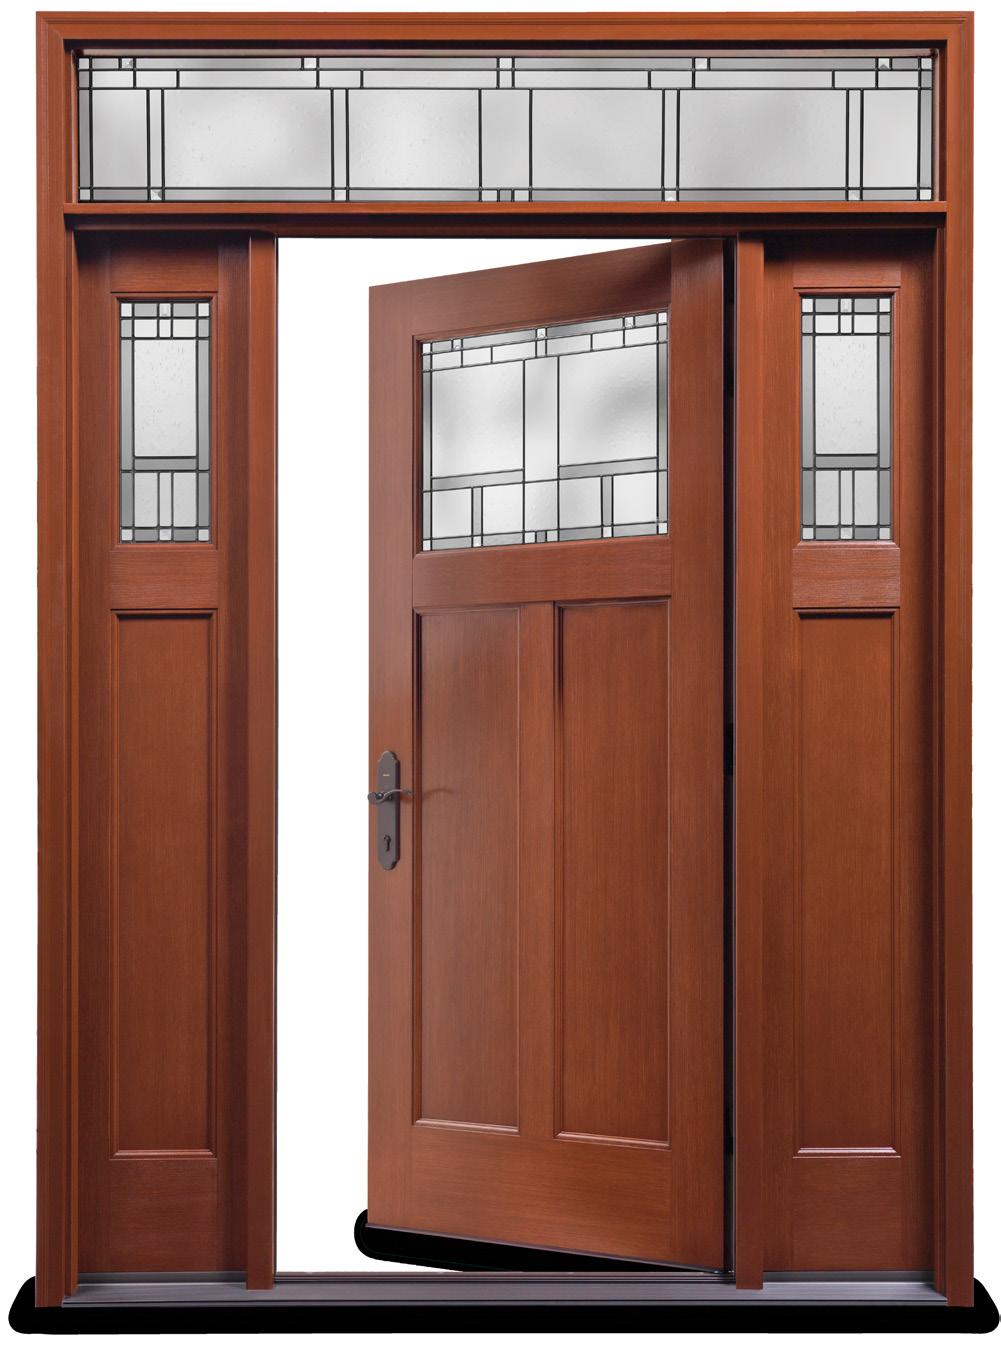 The next configuration decision is a complementary component such as a sidelite (a small panel with glass that sits next to the door) or a transom (a glass accent fixture that sits above the door).